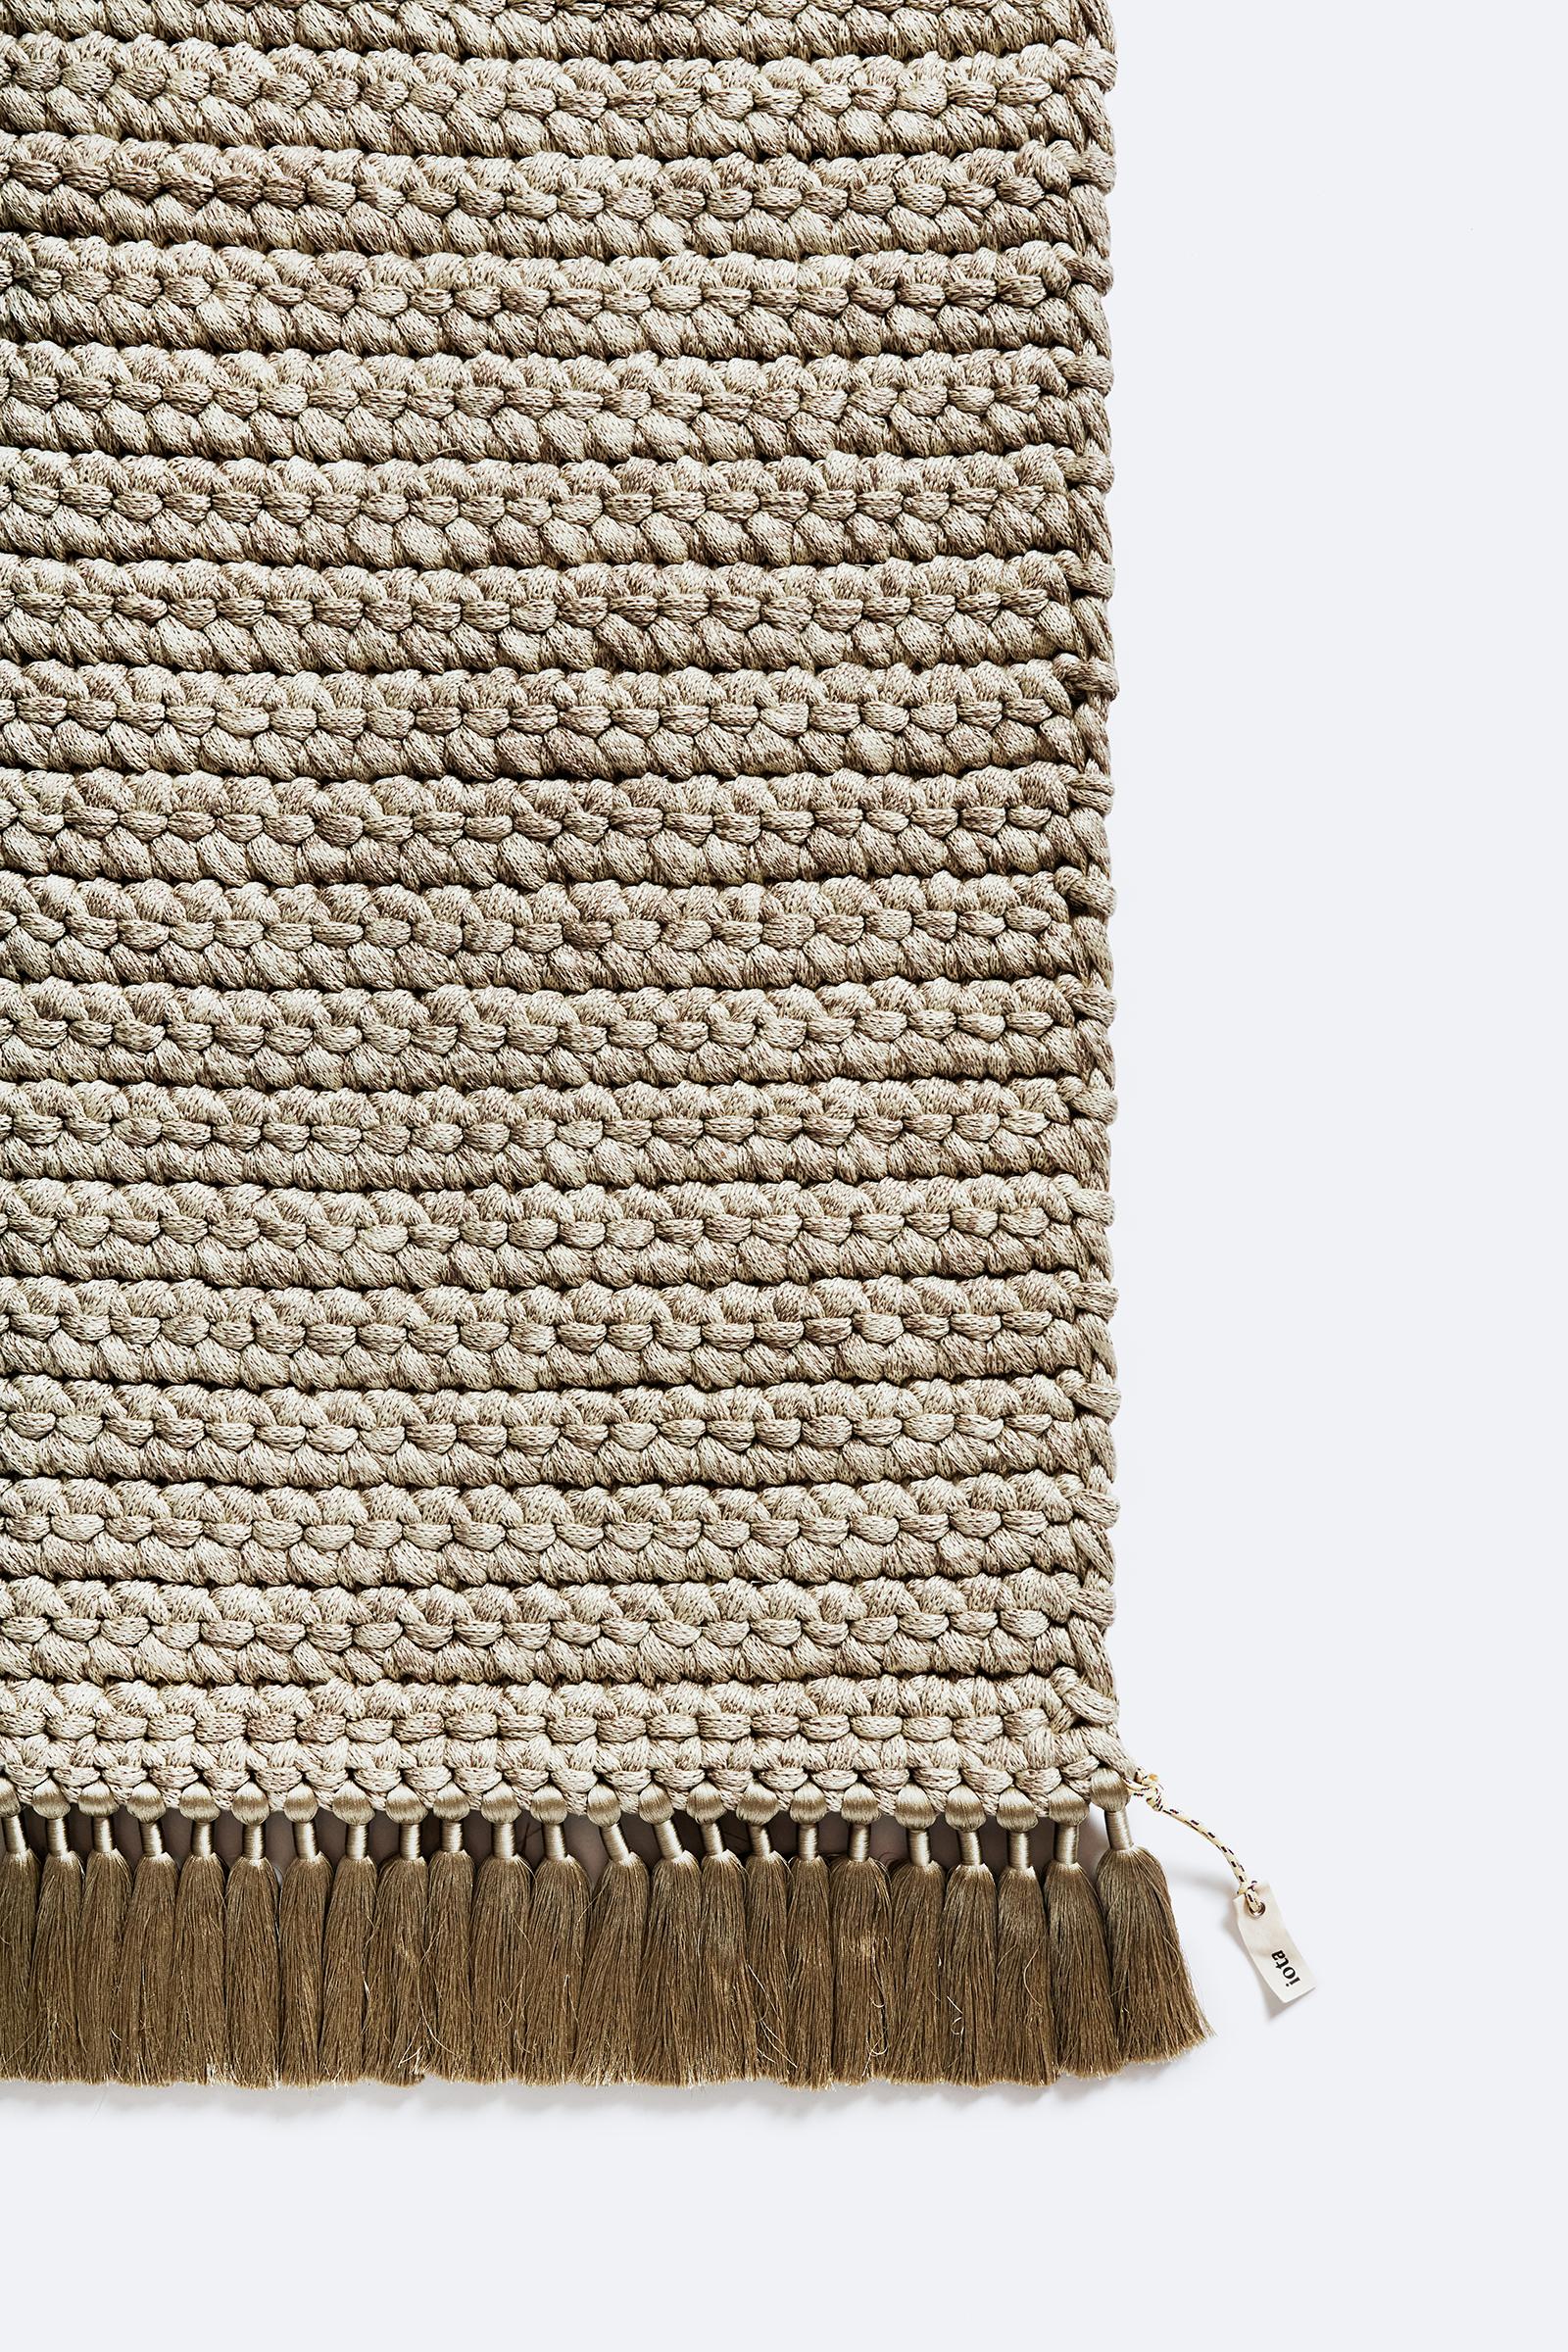 Handmade Crochet Thick Rug 170X240 cm in Beige - Sand & Cacao Colors In New Condition For Sale In Tel Aviv, IL